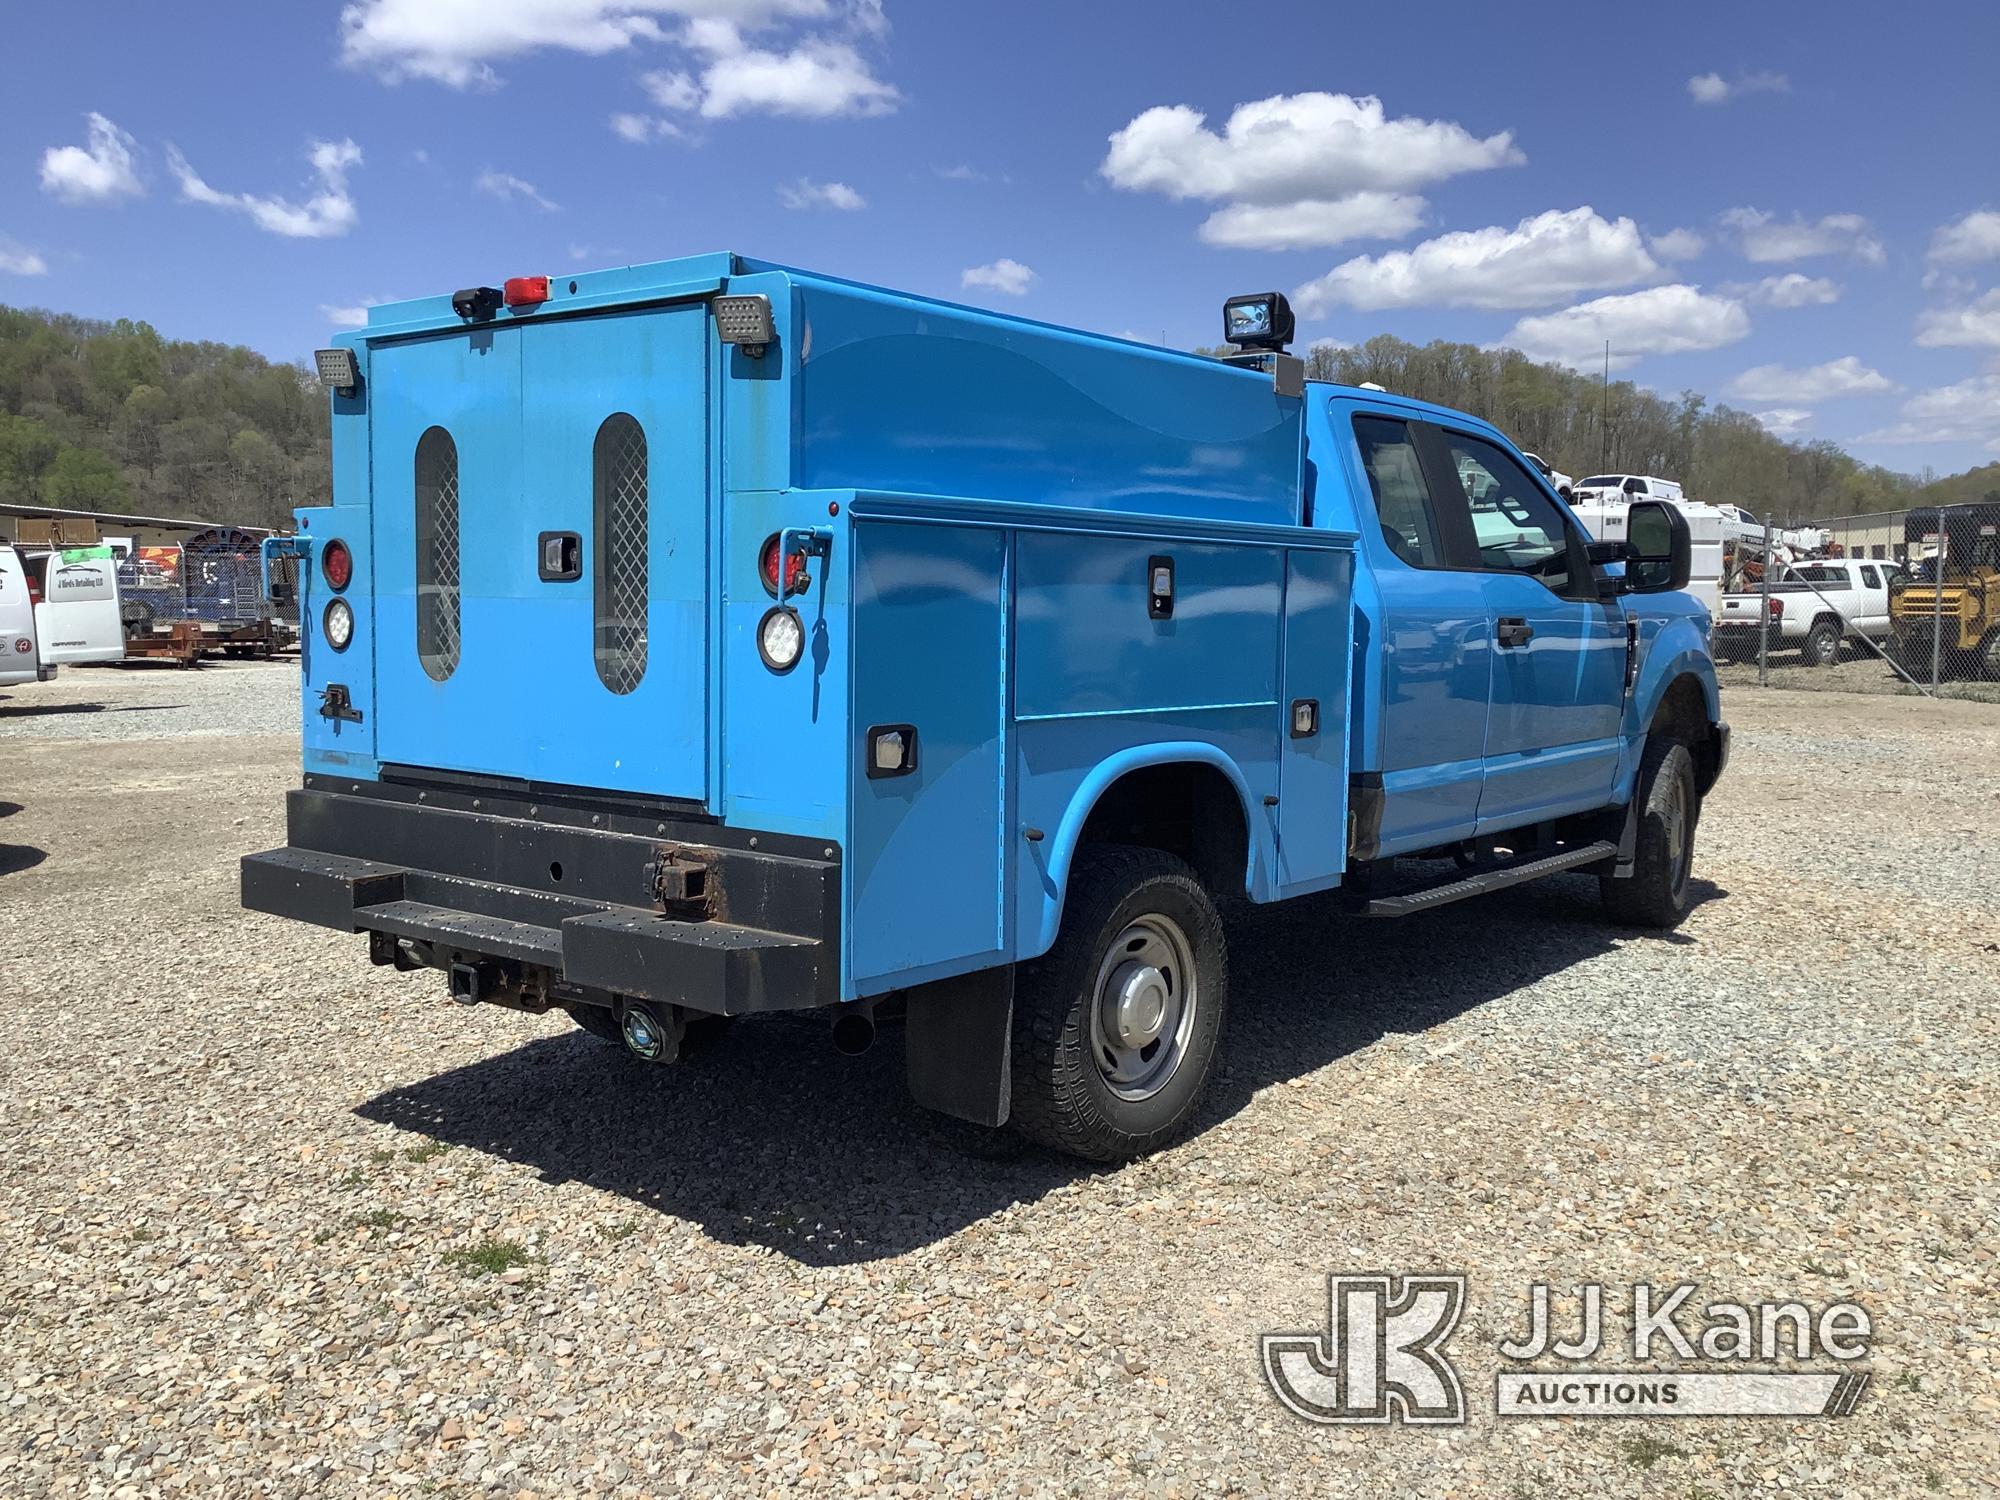 (Smock, PA) 2017 Ford F250 4x4 Extended-Cab Enclosed Service Truck Runs & Moves, TPS Light On, Rust